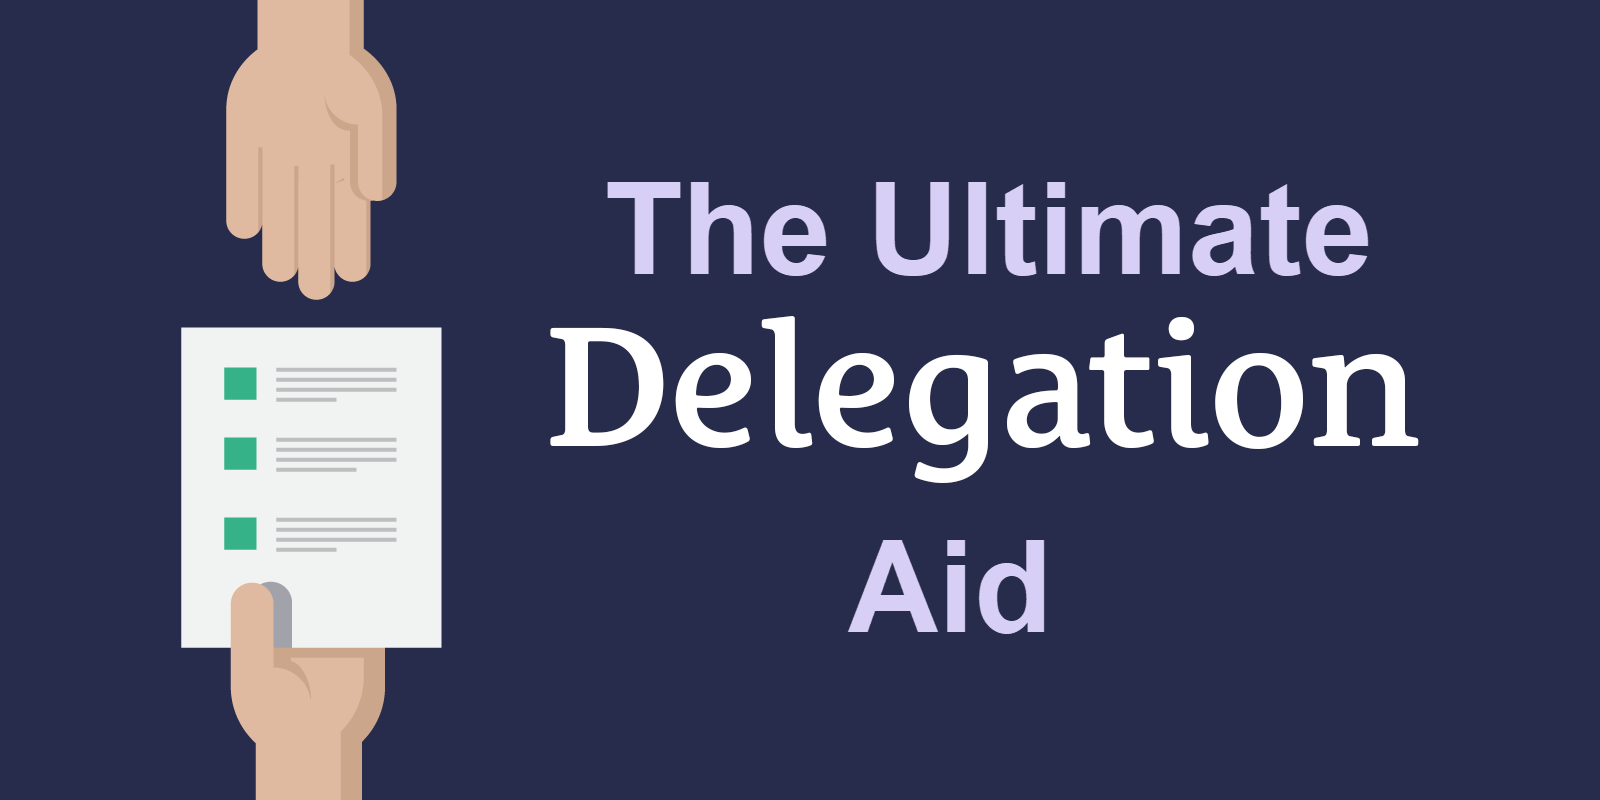 The Ultimate Delegation Aid | An Infographic